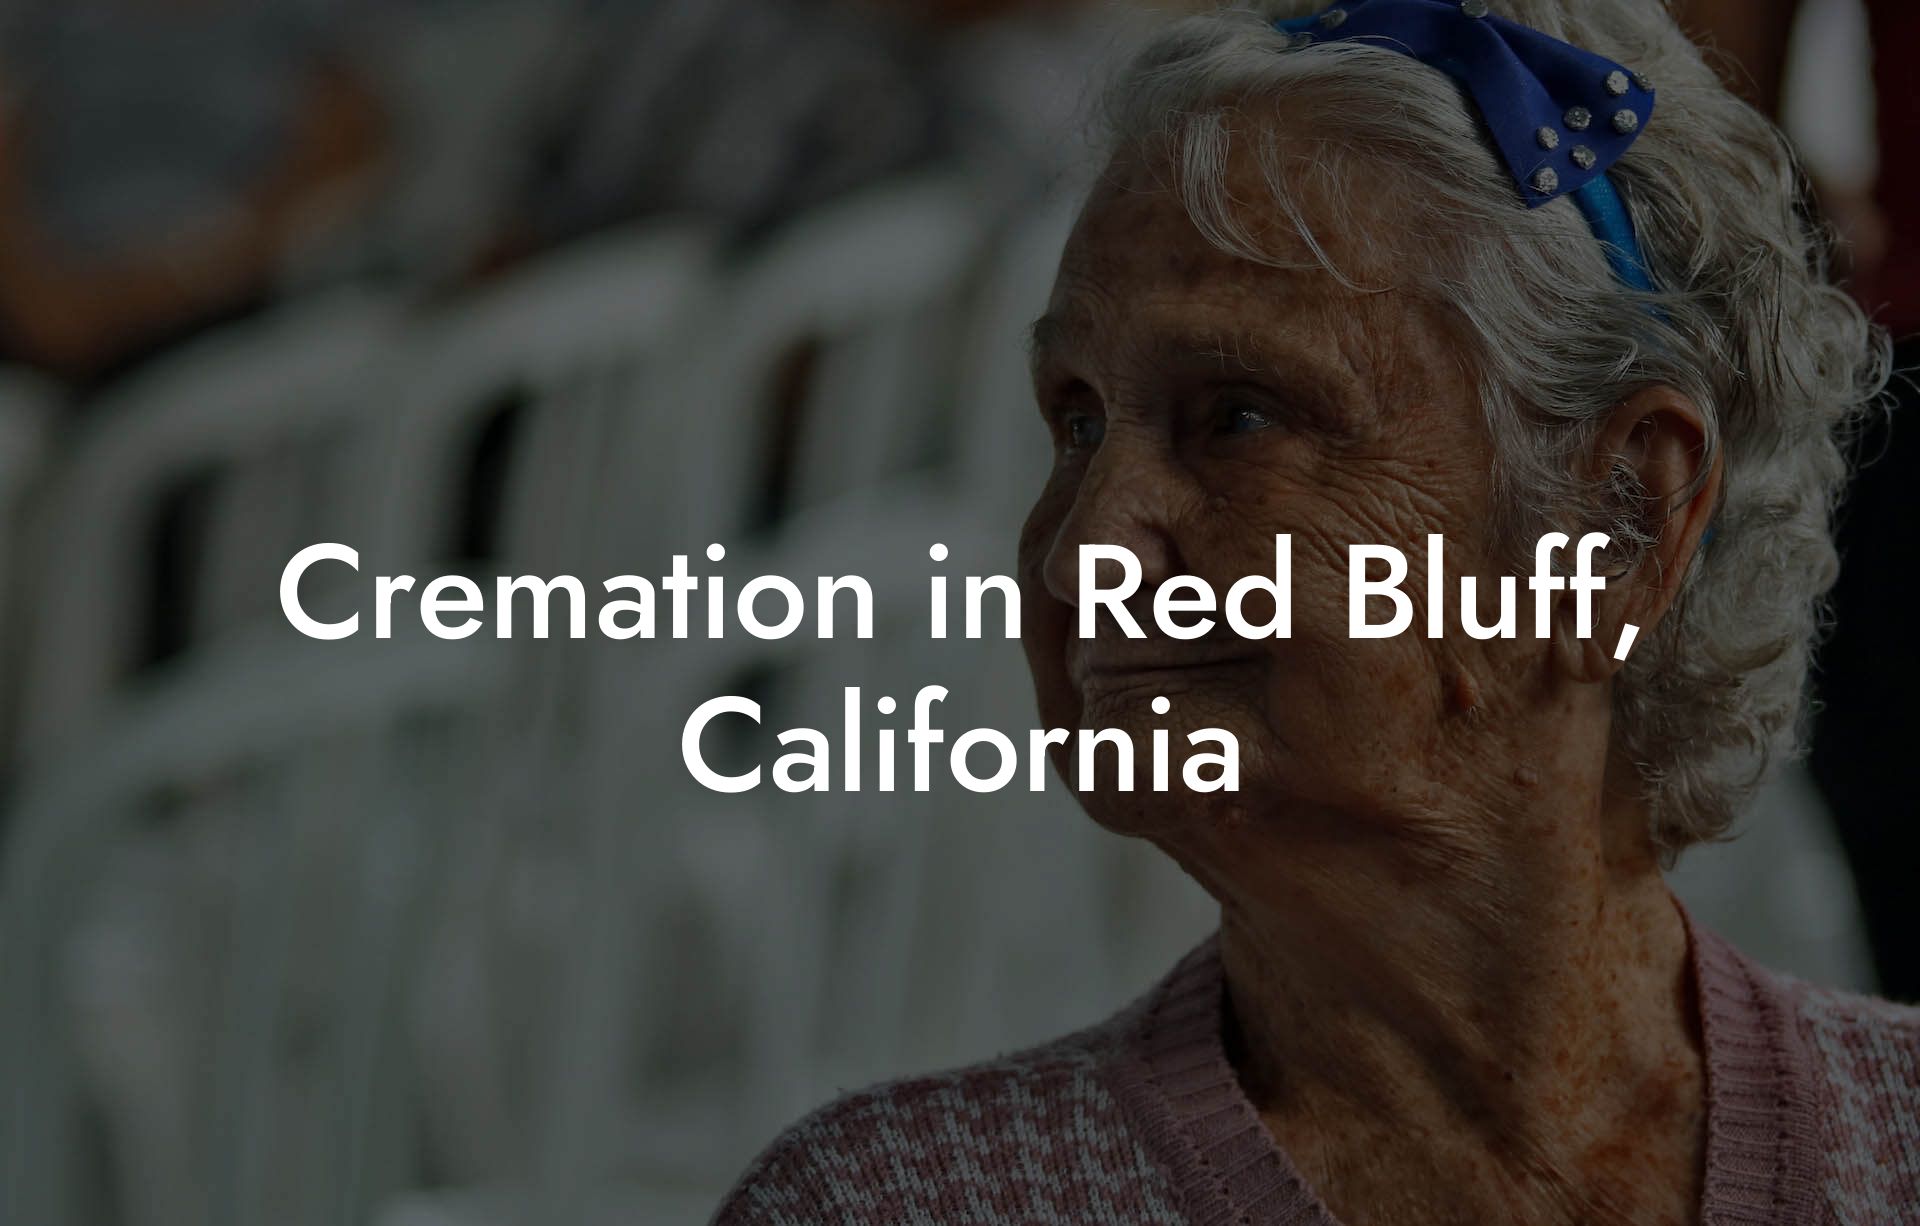 Cremation in Red Bluff, California